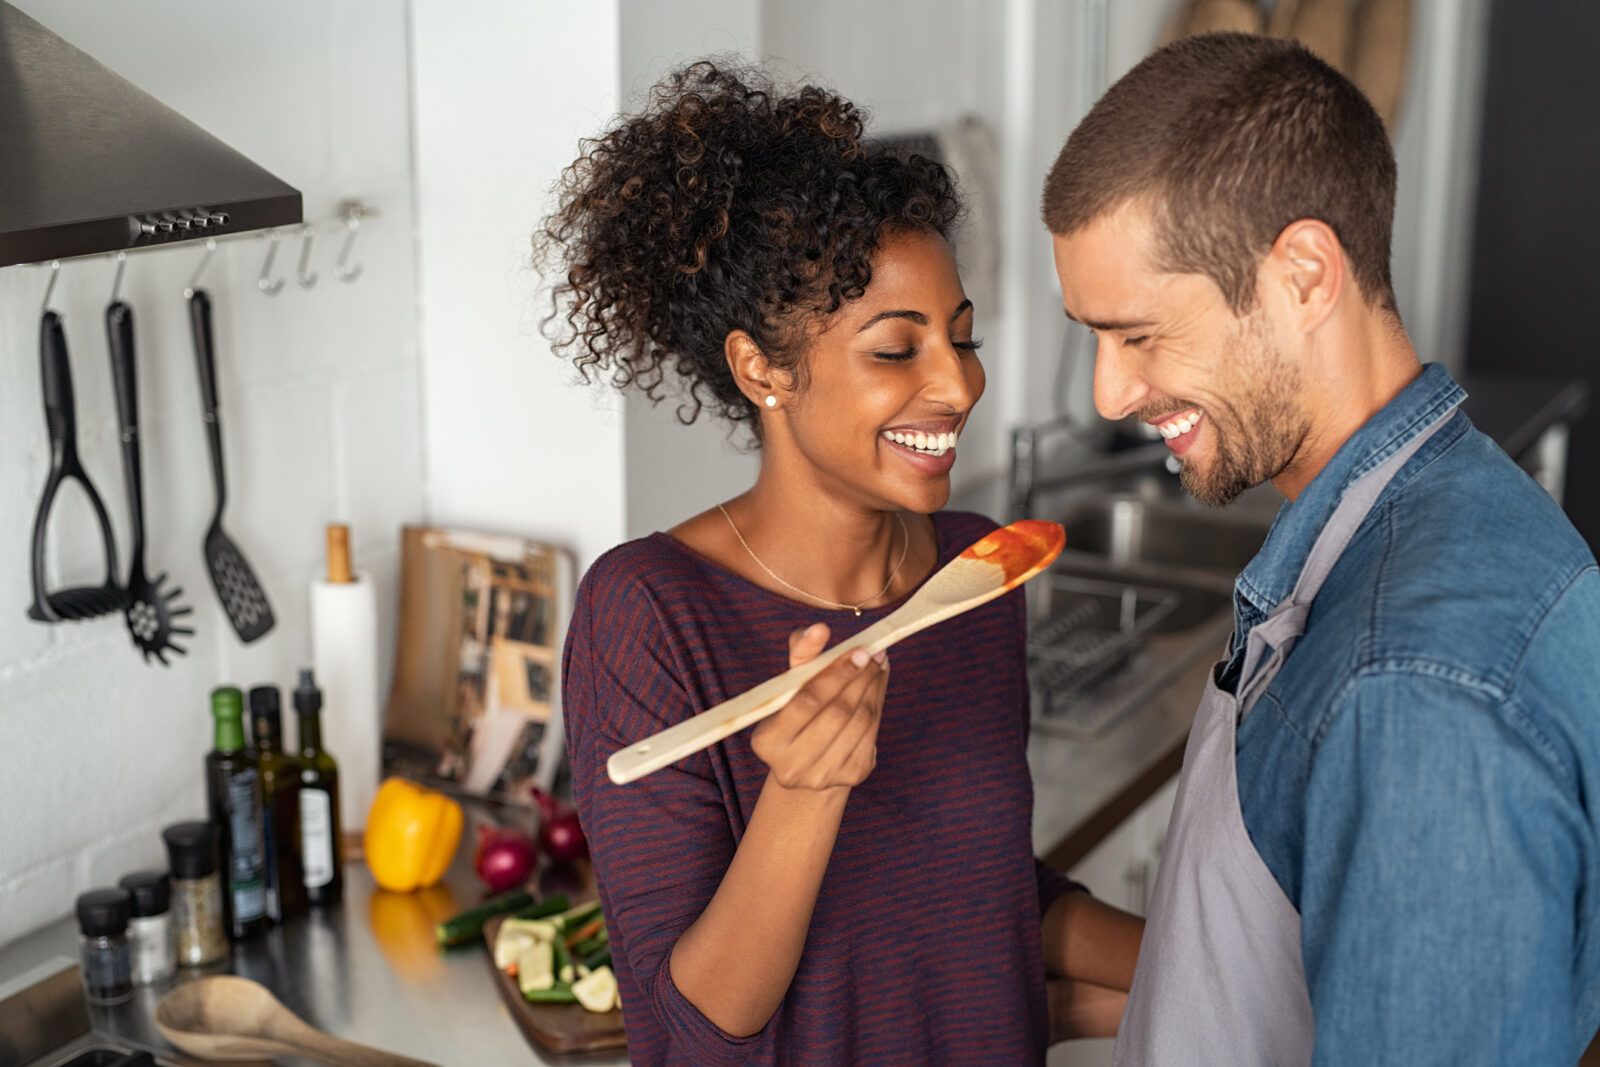 If You and Your Partner Have Done Most of These 🤢 “Gross” Things, You’ll Be Together Forever Multiethnic couple tasting food from wooden spoon